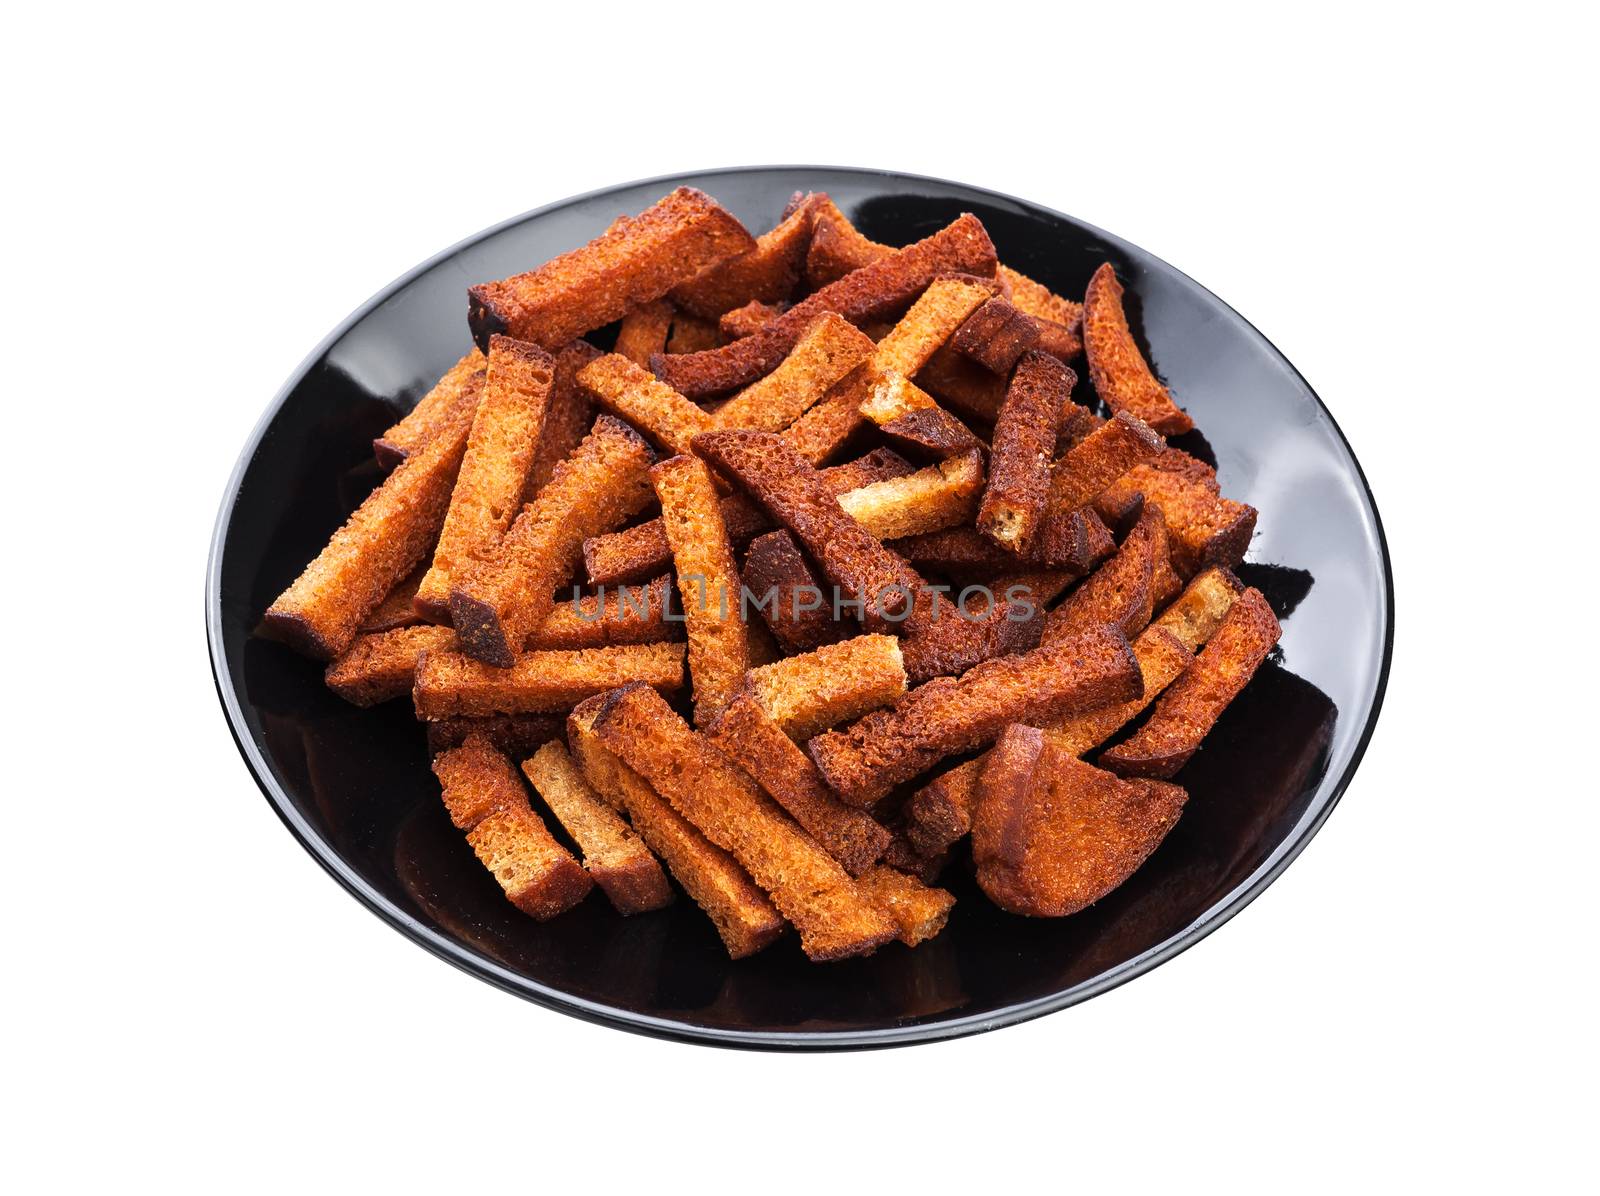 Fried bread croutons isolated on white background with clipping path. Crispy rye bread sticks